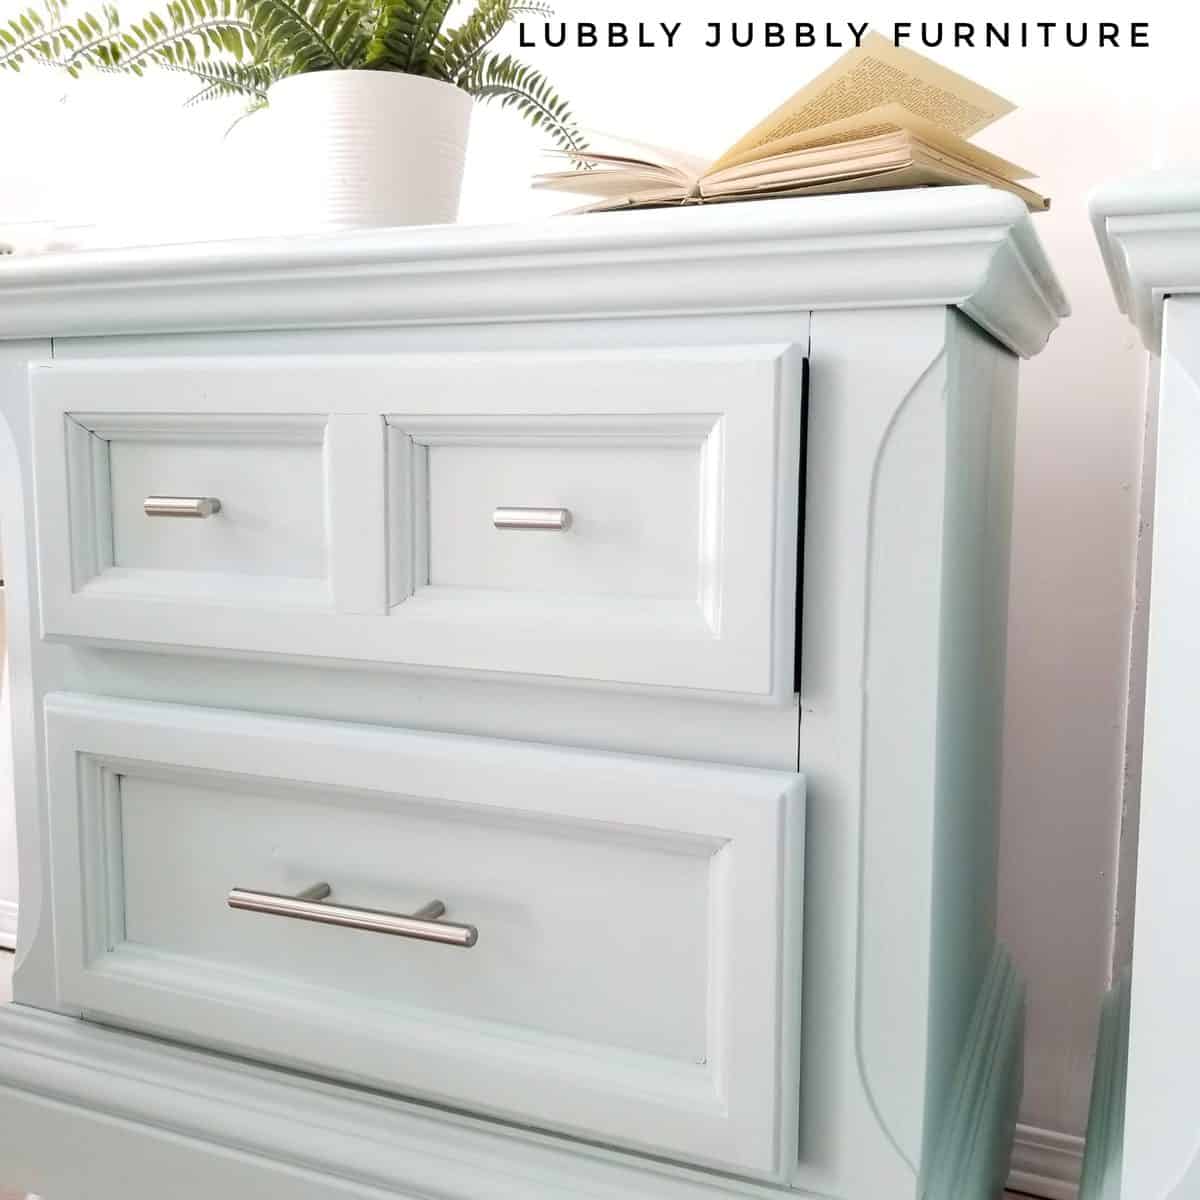 Fancy Frock pastel blue nightstand painted with chalk style furniture paint